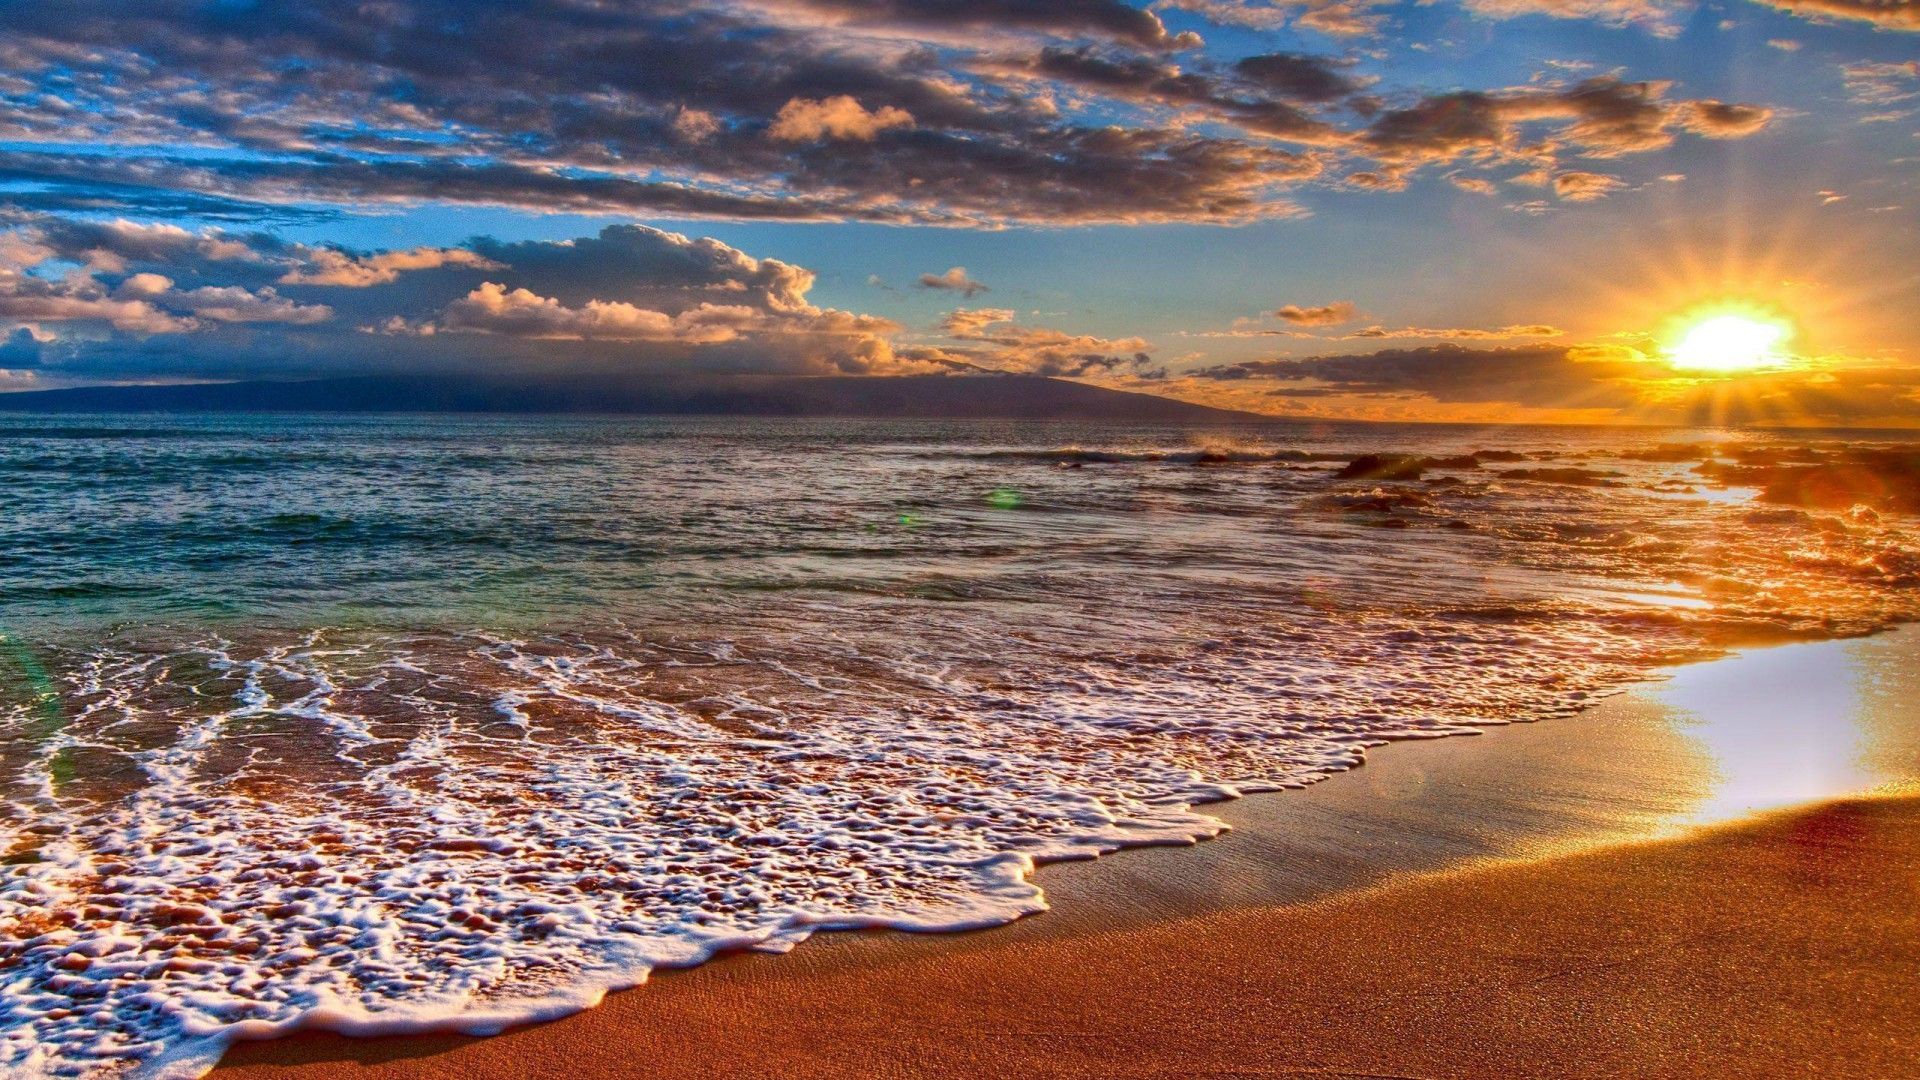 The sun sets over the ocean, with the beach in the foreground and the sky filled with clouds. - Beach, coast, sunset